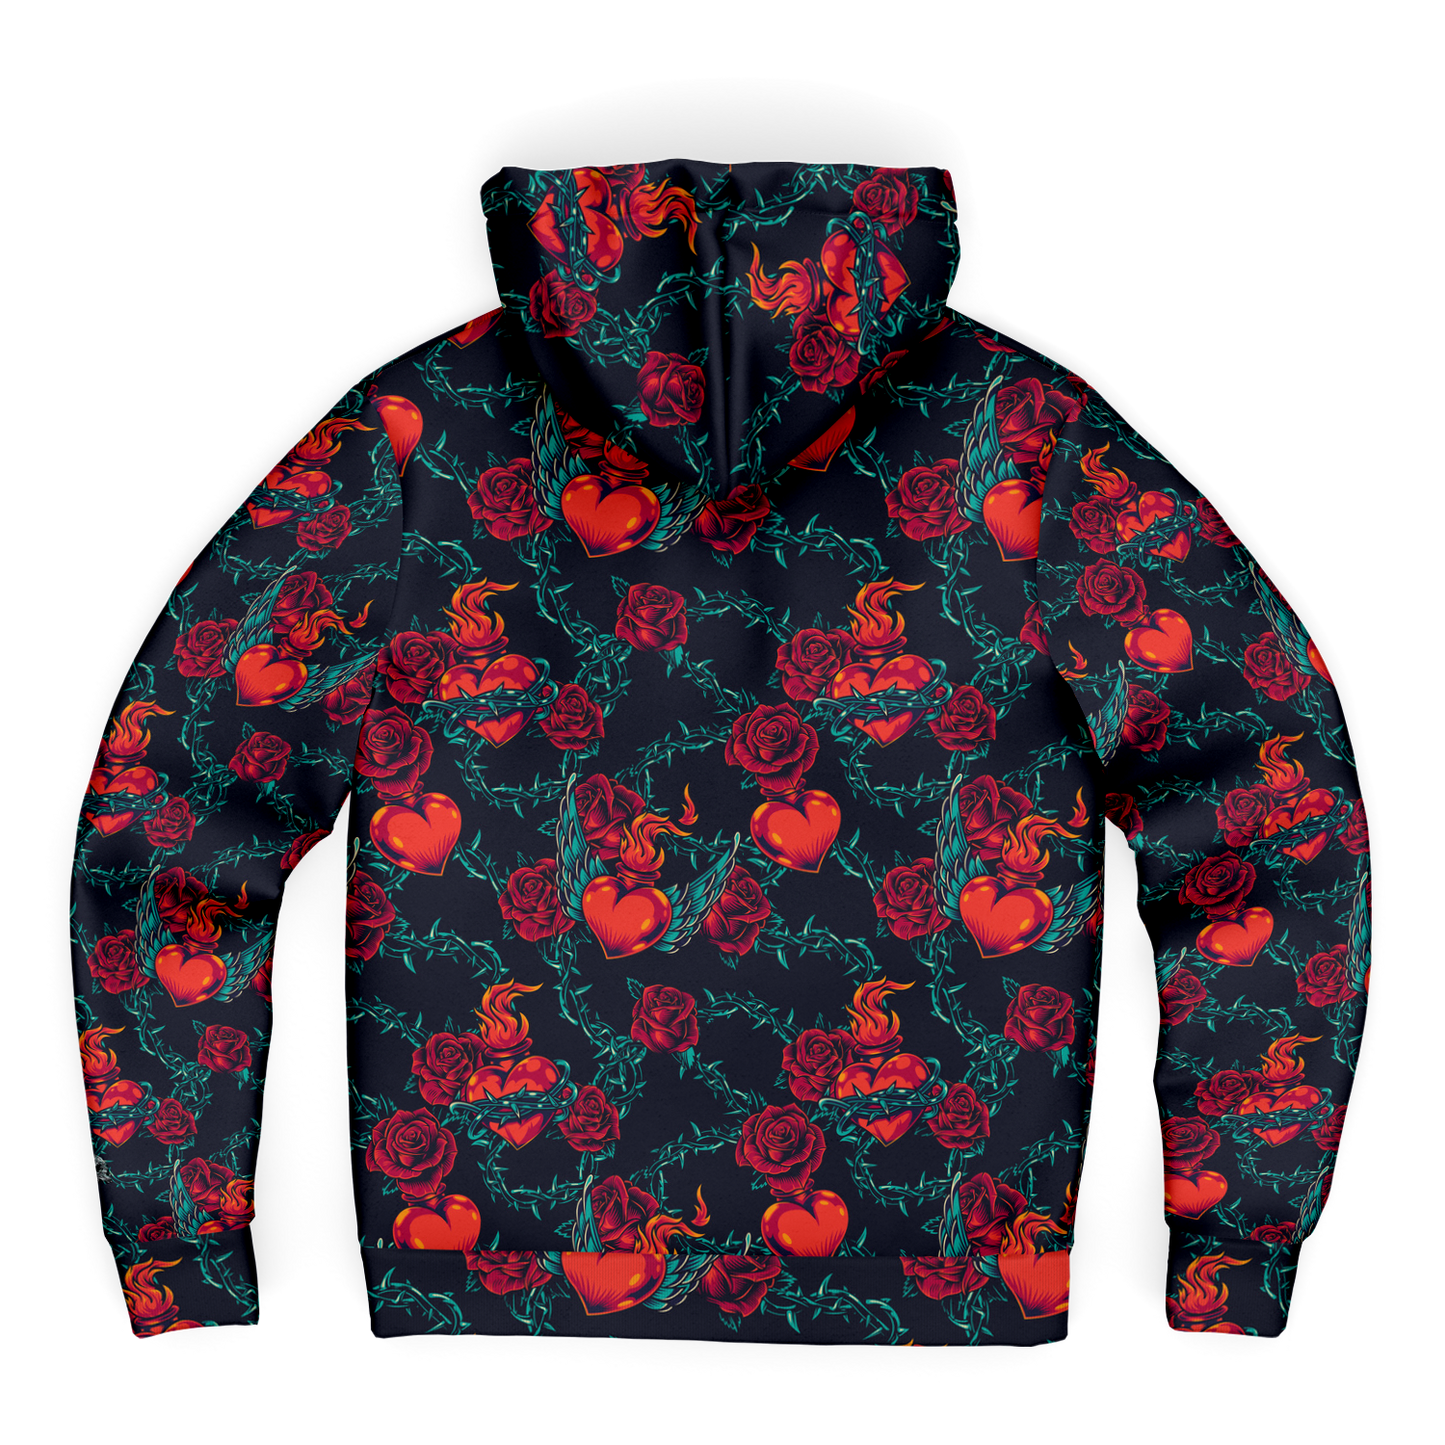 Fiery Hearts and Roses Zip-up hoodie features